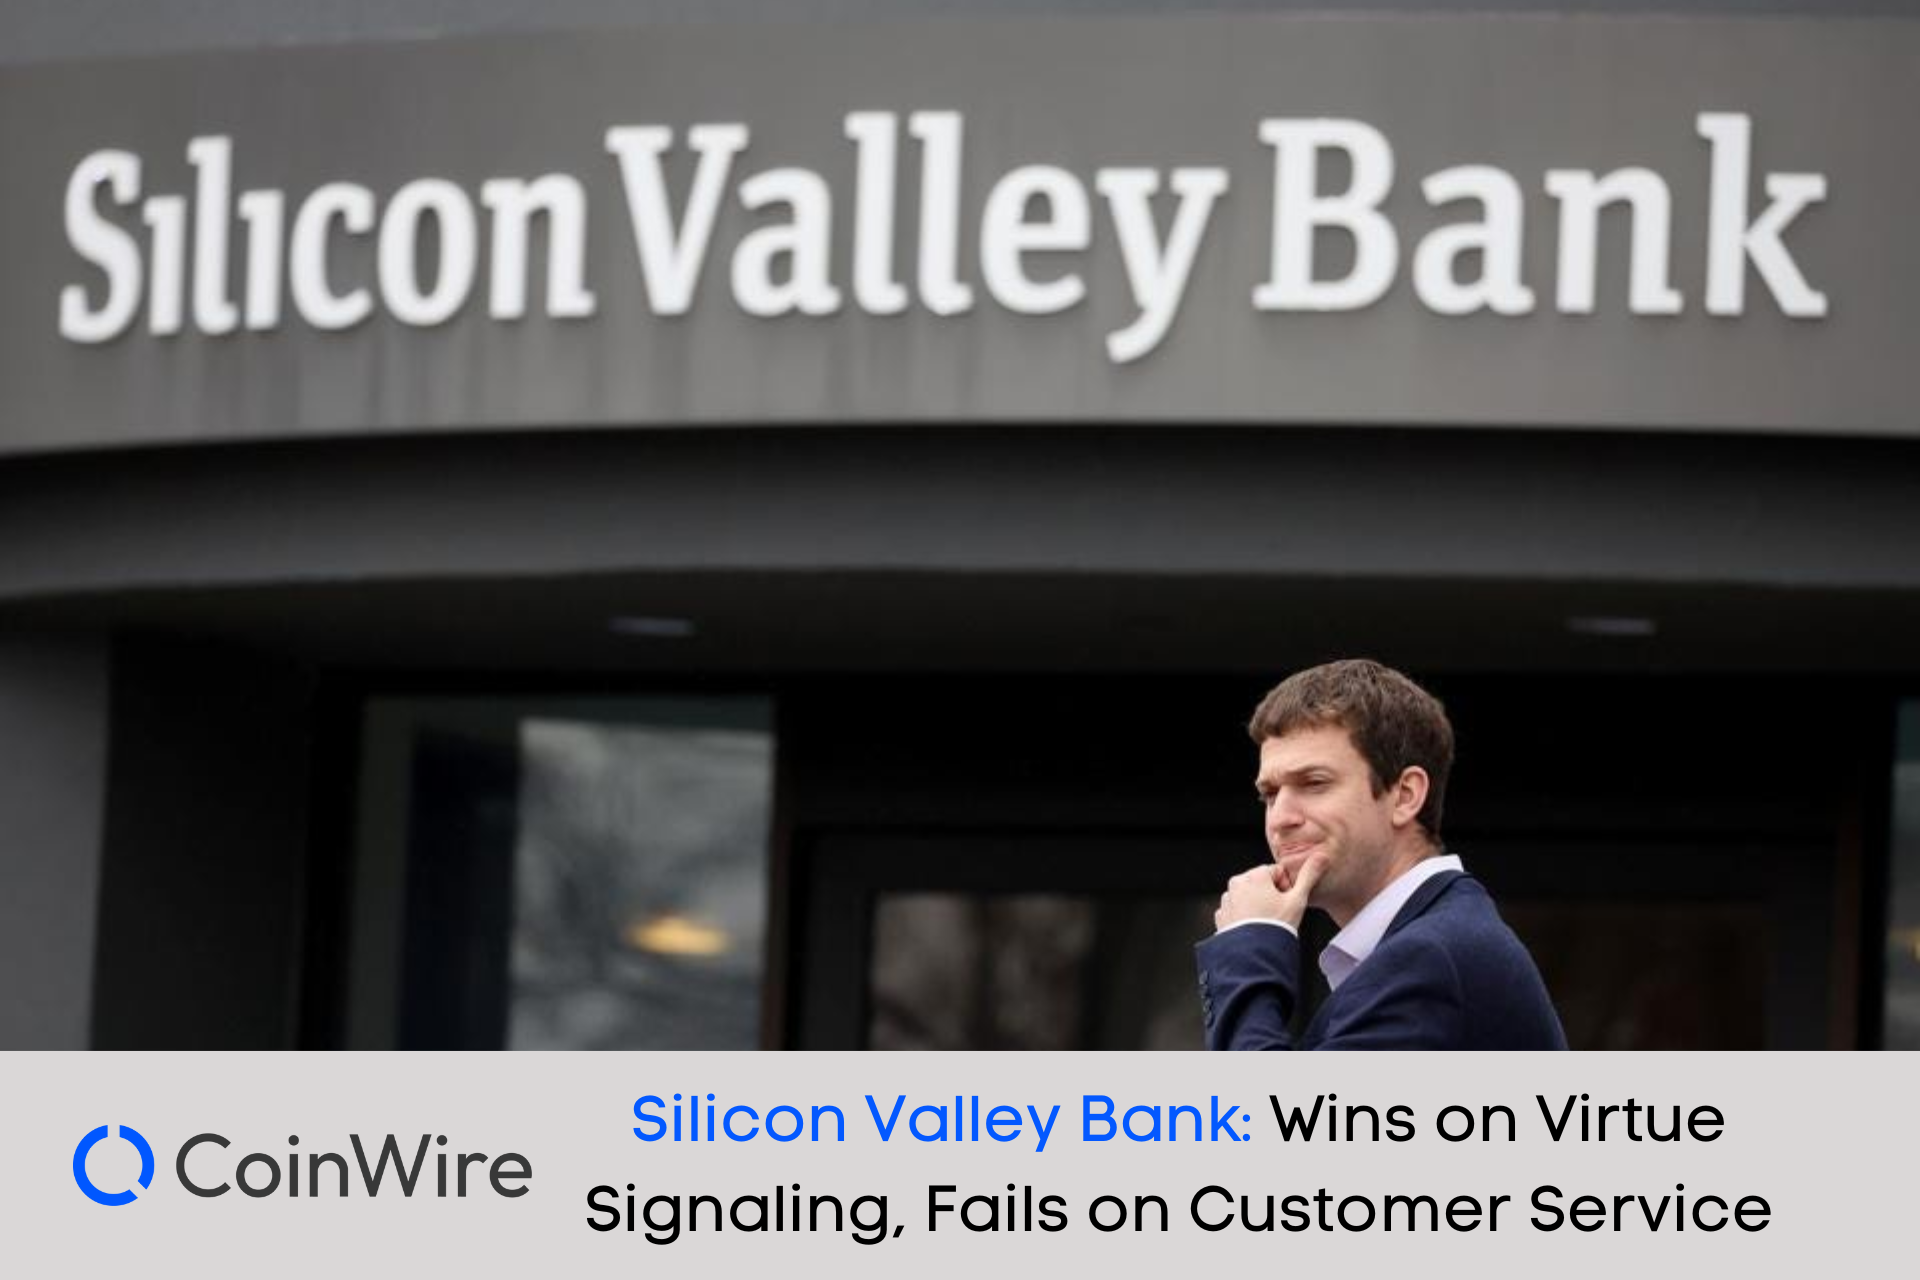 Silicon Valley Bank: Wins On Virtue Signaling, Fails On Customer Service